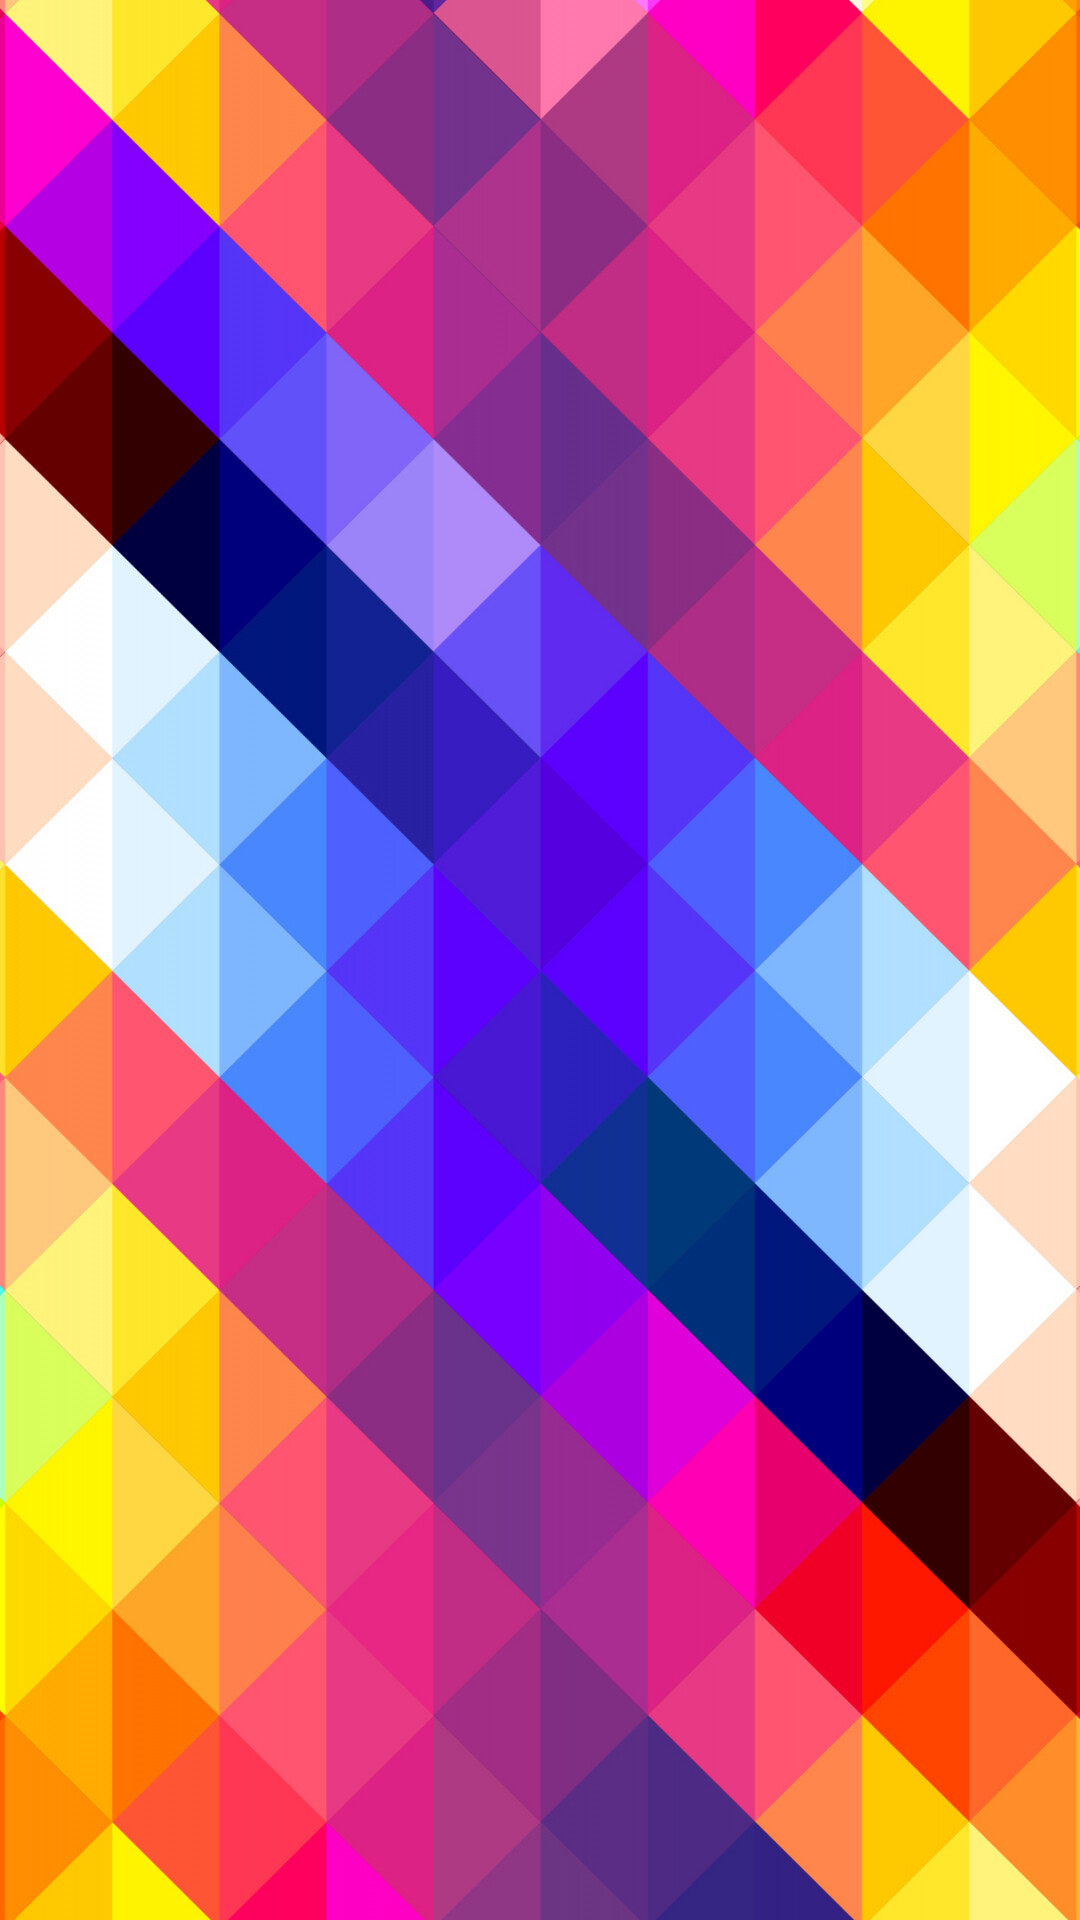 Geometry: Square, Colorful, Abstract, Isosceles triangles. 1080x1920 Full HD Background.